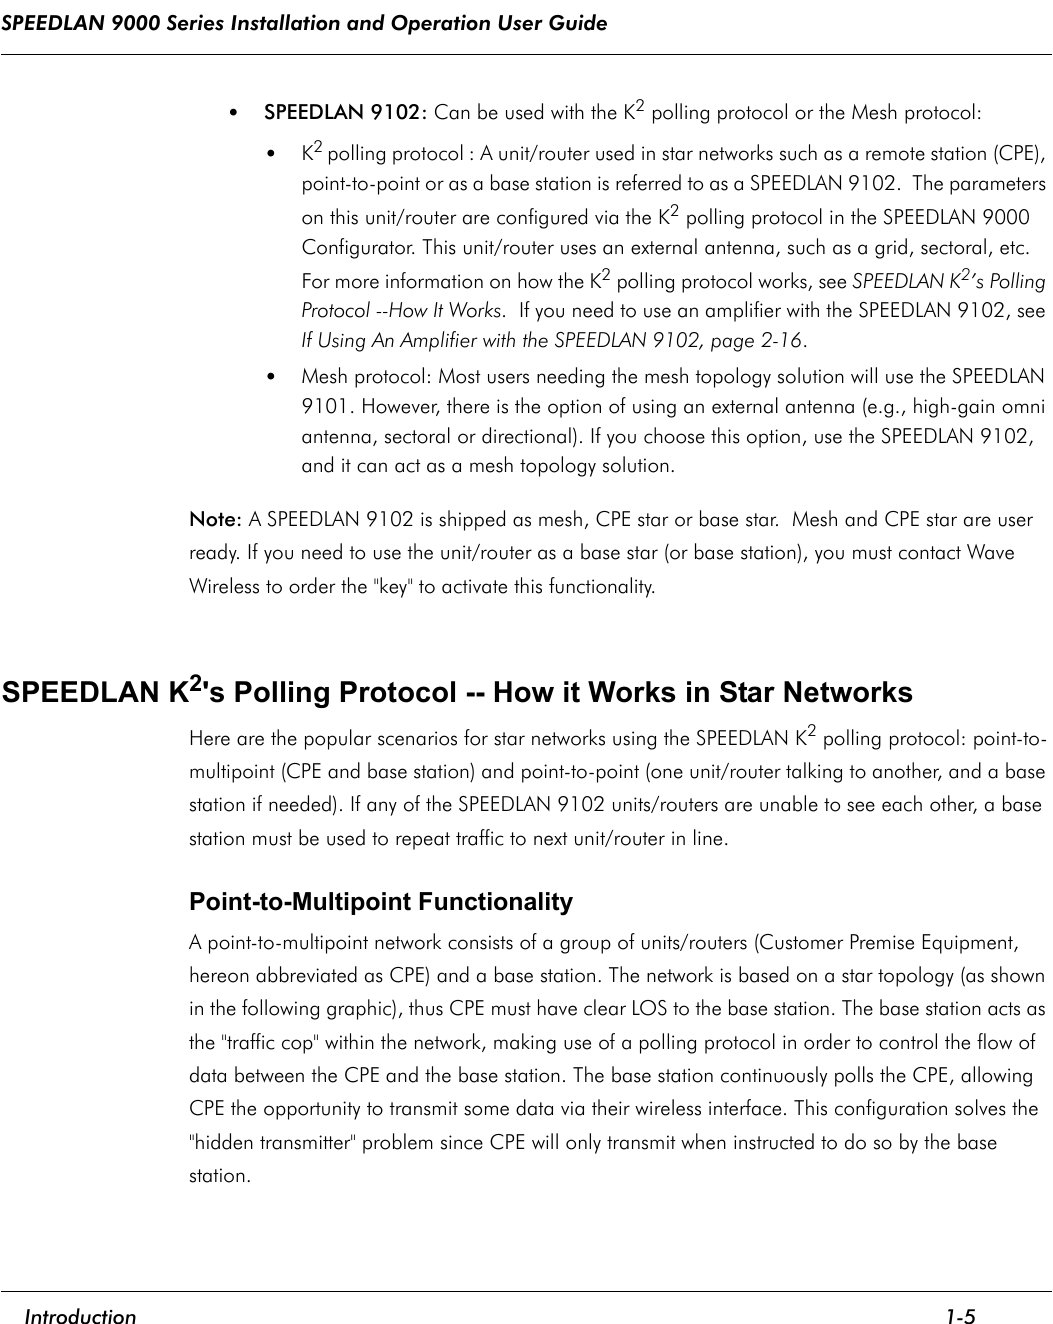 SPEEDLAN 9000 Series Installation and Operation User Guide     Introduction 1-5                                                                                                                                                               •SPEEDLAN 9102: Can be used with the K2 polling protocol or the Mesh protocol: •K2 polling protocol : A unit/router used in star networks such as a remote station (CPE), point-to-point or as a base station is referred to as a SPEEDLAN 9102.  The parameters on this unit/router are configured via the K2 polling protocol in the SPEEDLAN 9000 Configurator. This unit/router uses an external antenna, such as a grid, sectoral, etc. For more information on how the K2 polling protocol works, see SPEEDLAN K2’s Polling Protocol --How It Works.  If you need to use an amplifier with the SPEEDLAN 9102, see If Using An Amplifier with the SPEEDLAN 9102, page 2-16.•Mesh protocol: Most users needing the mesh topology solution will use the SPEEDLAN 9101. However, there is the option of using an external antenna (e.g., high-gain omni antenna, sectoral or directional). If you choose this option, use the SPEEDLAN 9102, and it can act as a mesh topology solution. Note: A SPEEDLAN 9102 is shipped as mesh, CPE star or base star.  Mesh and CPE star are user ready. If you need to use the unit/router as a base star (or base station), you must contact Wave Wireless to order the &quot;key&quot; to activate this functionality. SPEEDLAN K2&apos;s Polling Protocol -- How it Works in Star NetworksHere are the popular scenarios for star networks using the SPEEDLAN K2 polling protocol: point-to-multipoint (CPE and base station) and point-to-point (one unit/router talking to another, and a base station if needed). If any of the SPEEDLAN 9102 units/routers are unable to see each other, a base station must be used to repeat traffic to next unit/router in line. Point-to-Multipoint FunctionalityA point-to-multipoint network consists of a group of units/routers (Customer Premise Equipment, hereon abbreviated as CPE) and a base station. The network is based on a star topology (as shown in the following graphic), thus CPE must have clear LOS to the base station. The base station acts as the &quot;traffic cop&quot; within the network, making use of a polling protocol in order to control the flow of data between the CPE and the base station. The base station continuously polls the CPE, allowing CPE the opportunity to transmit some data via their wireless interface. This configuration solves the &quot;hidden transmitter&quot; problem since CPE will only transmit when instructed to do so by the base station. 